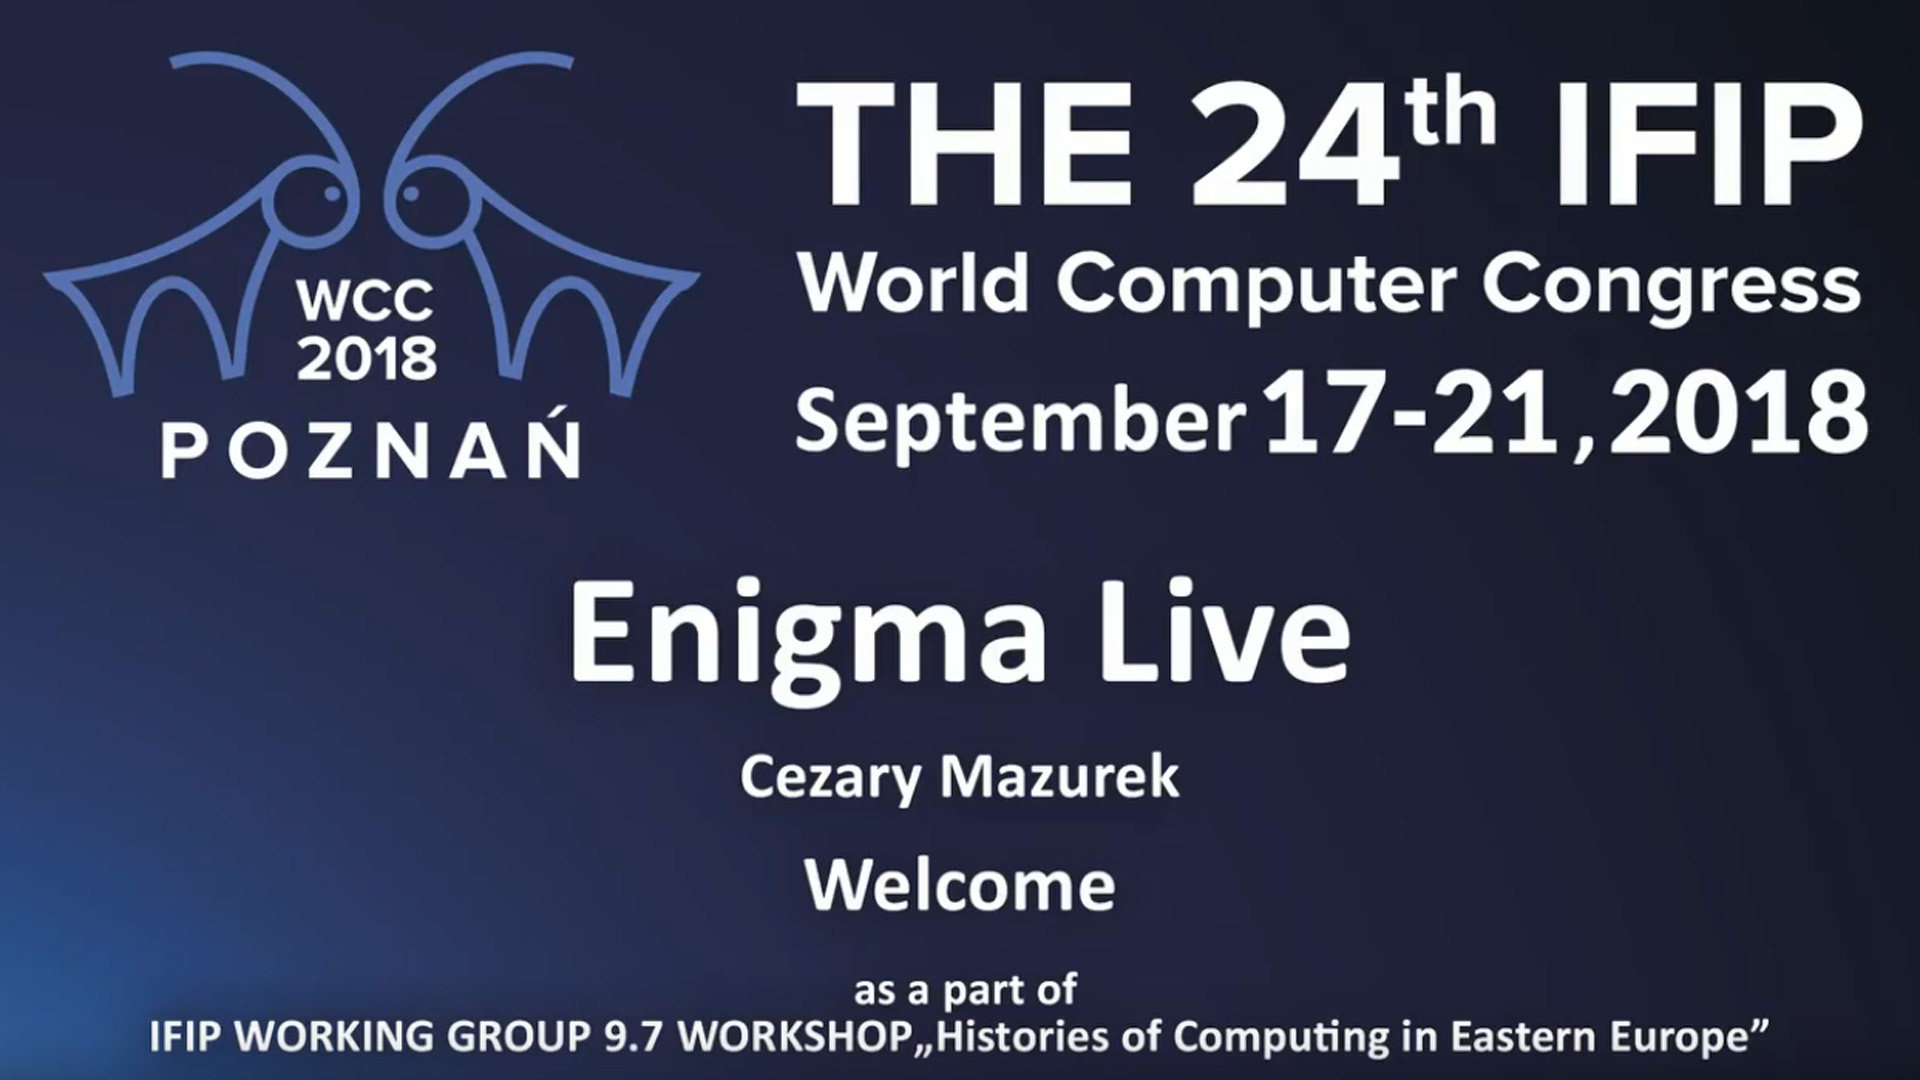 Enigma Live Show during WCC 2018